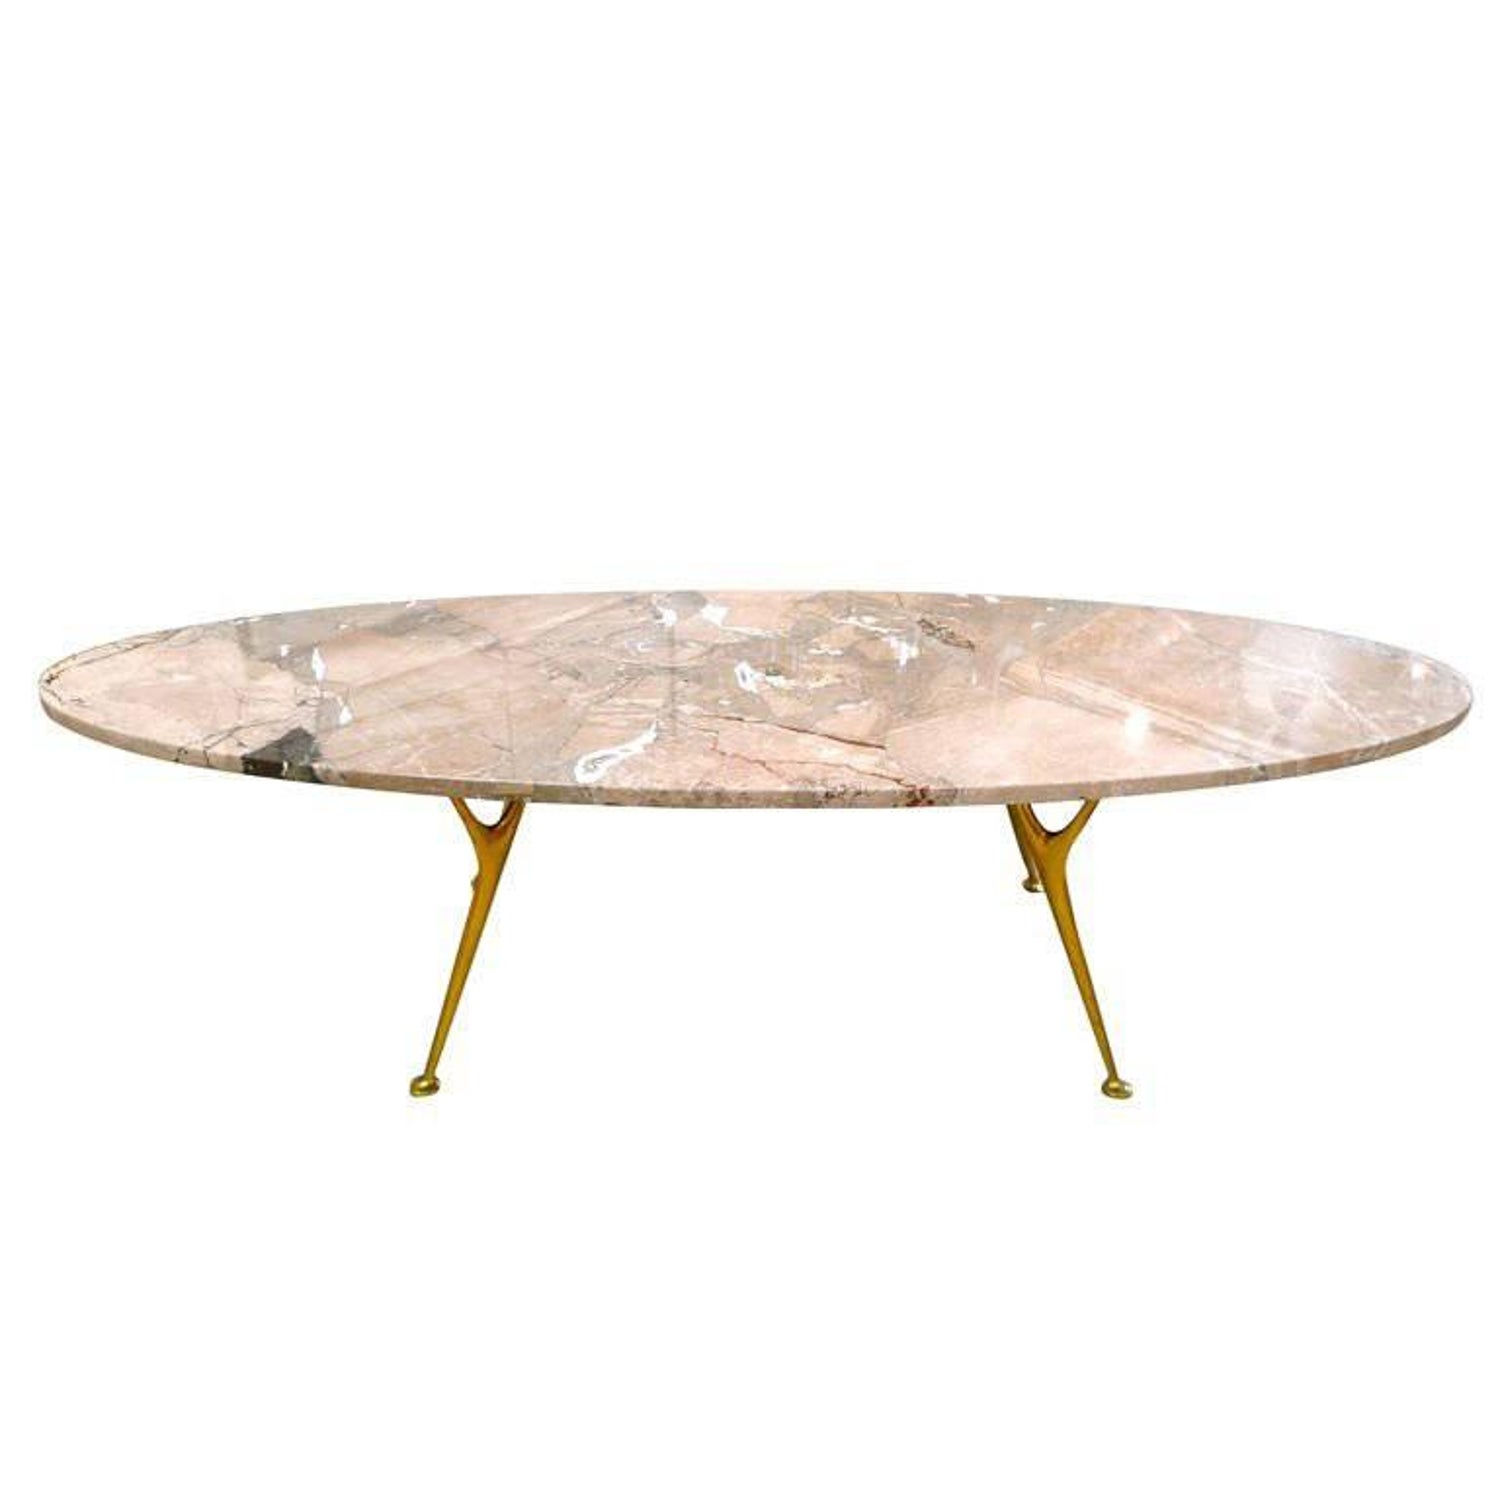 Elliptical Italian Marble Tail, Small Round Pink Dotted Dorothy Outdoor Coffee Table